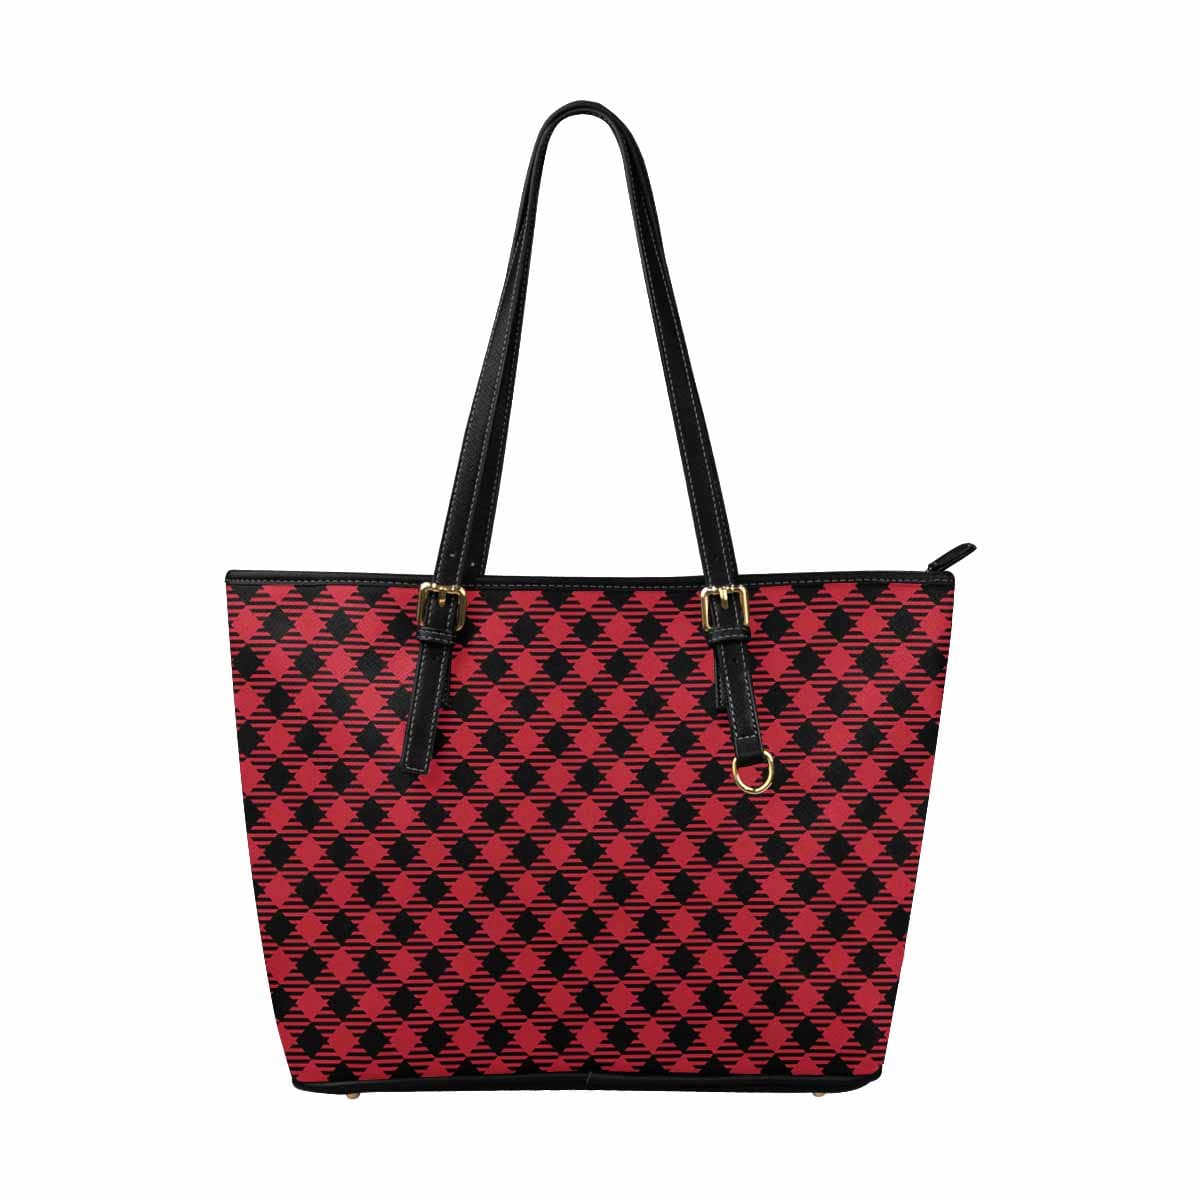 Large Leather Tote Shoulder Bag - Buffalo Plaid Red And Black S954657 - Bags